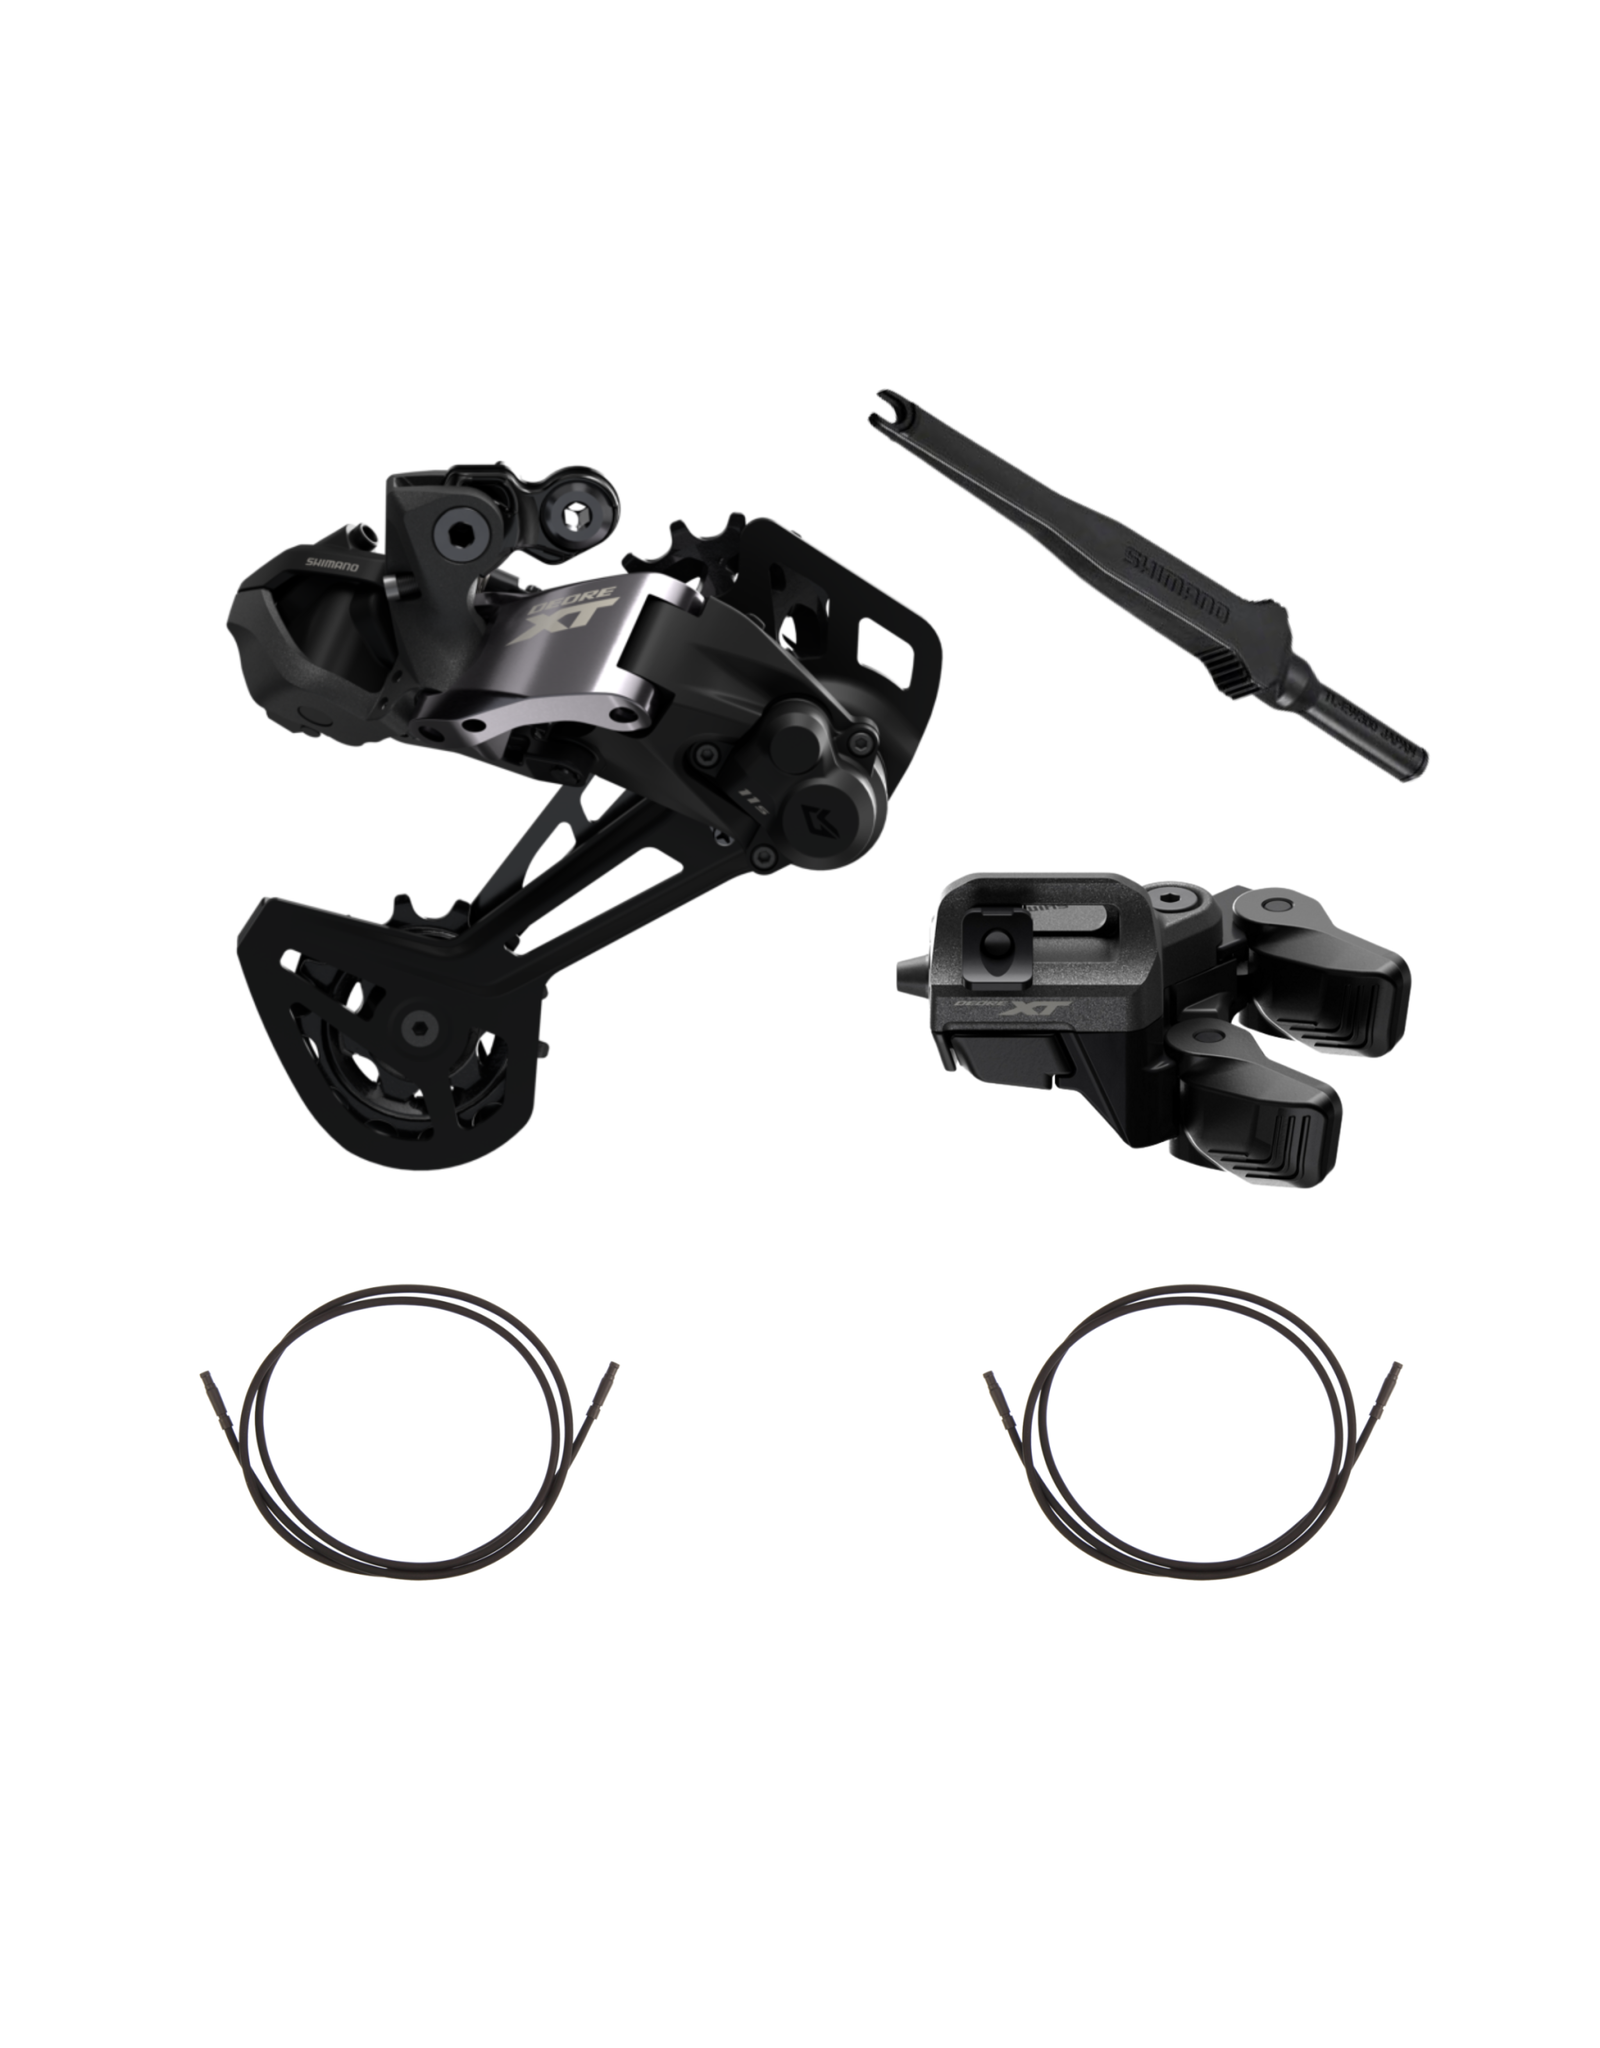 Shimano Shimano STEPS XT Di2 Upgrade Kit - SGS 11-Speed, Shadow Plus, Direct Attachment (Derailleur, Shifter, Qty 2 Cables)